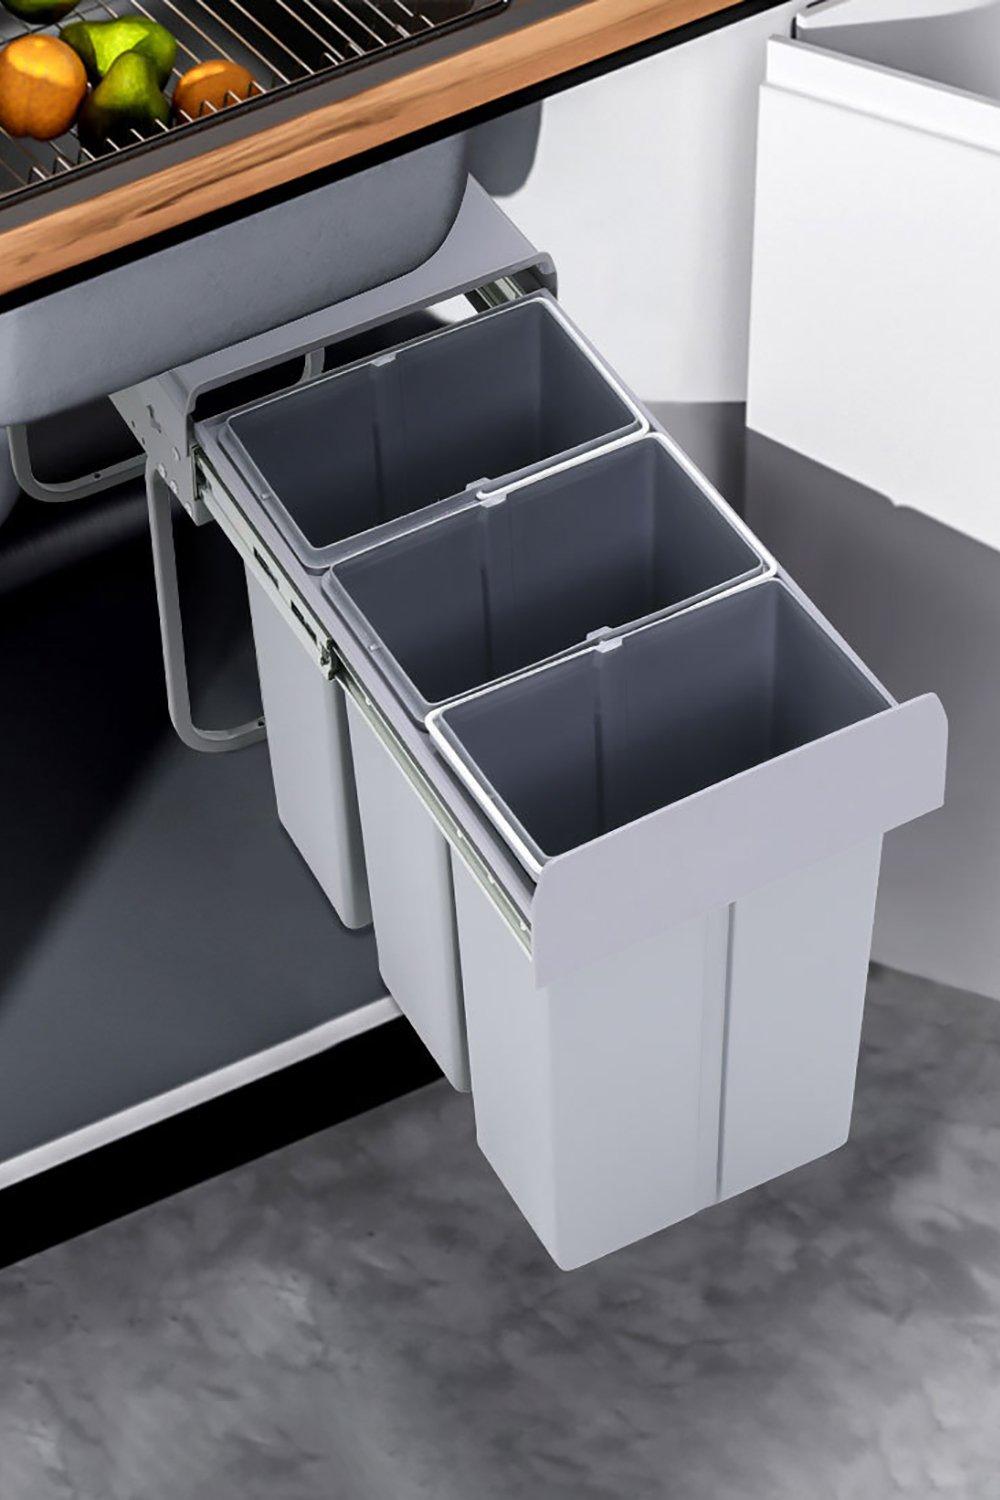 30L 3-Compartment Waste Bin Cabinet Pull-out Trash Can Kitchen